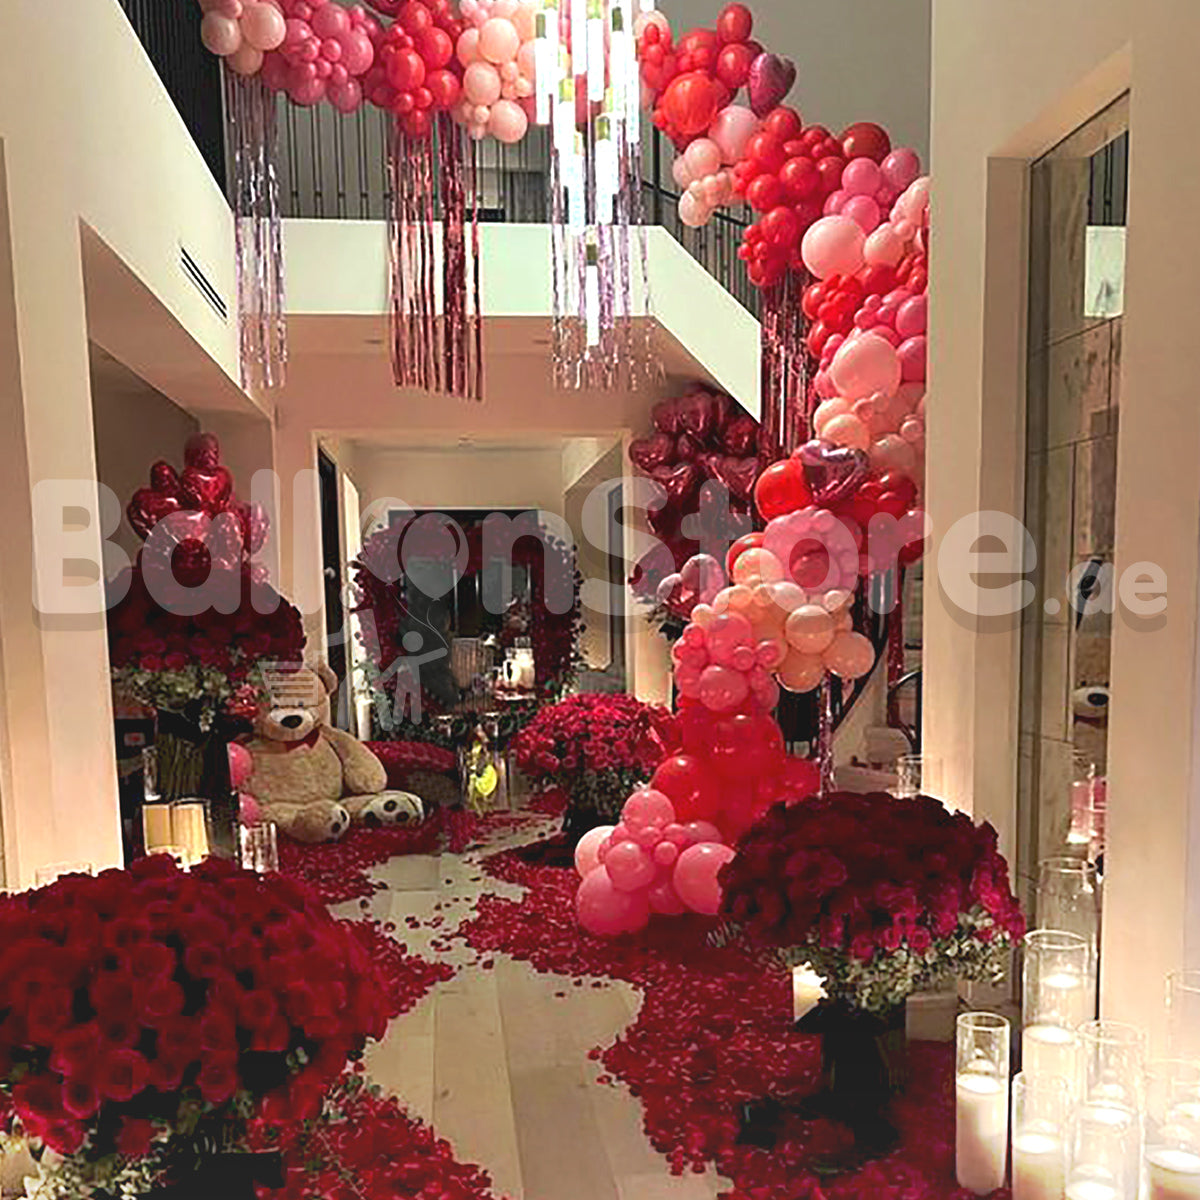 Exclusively Extravagant LOVE Red Balloons and Flowers Decoration